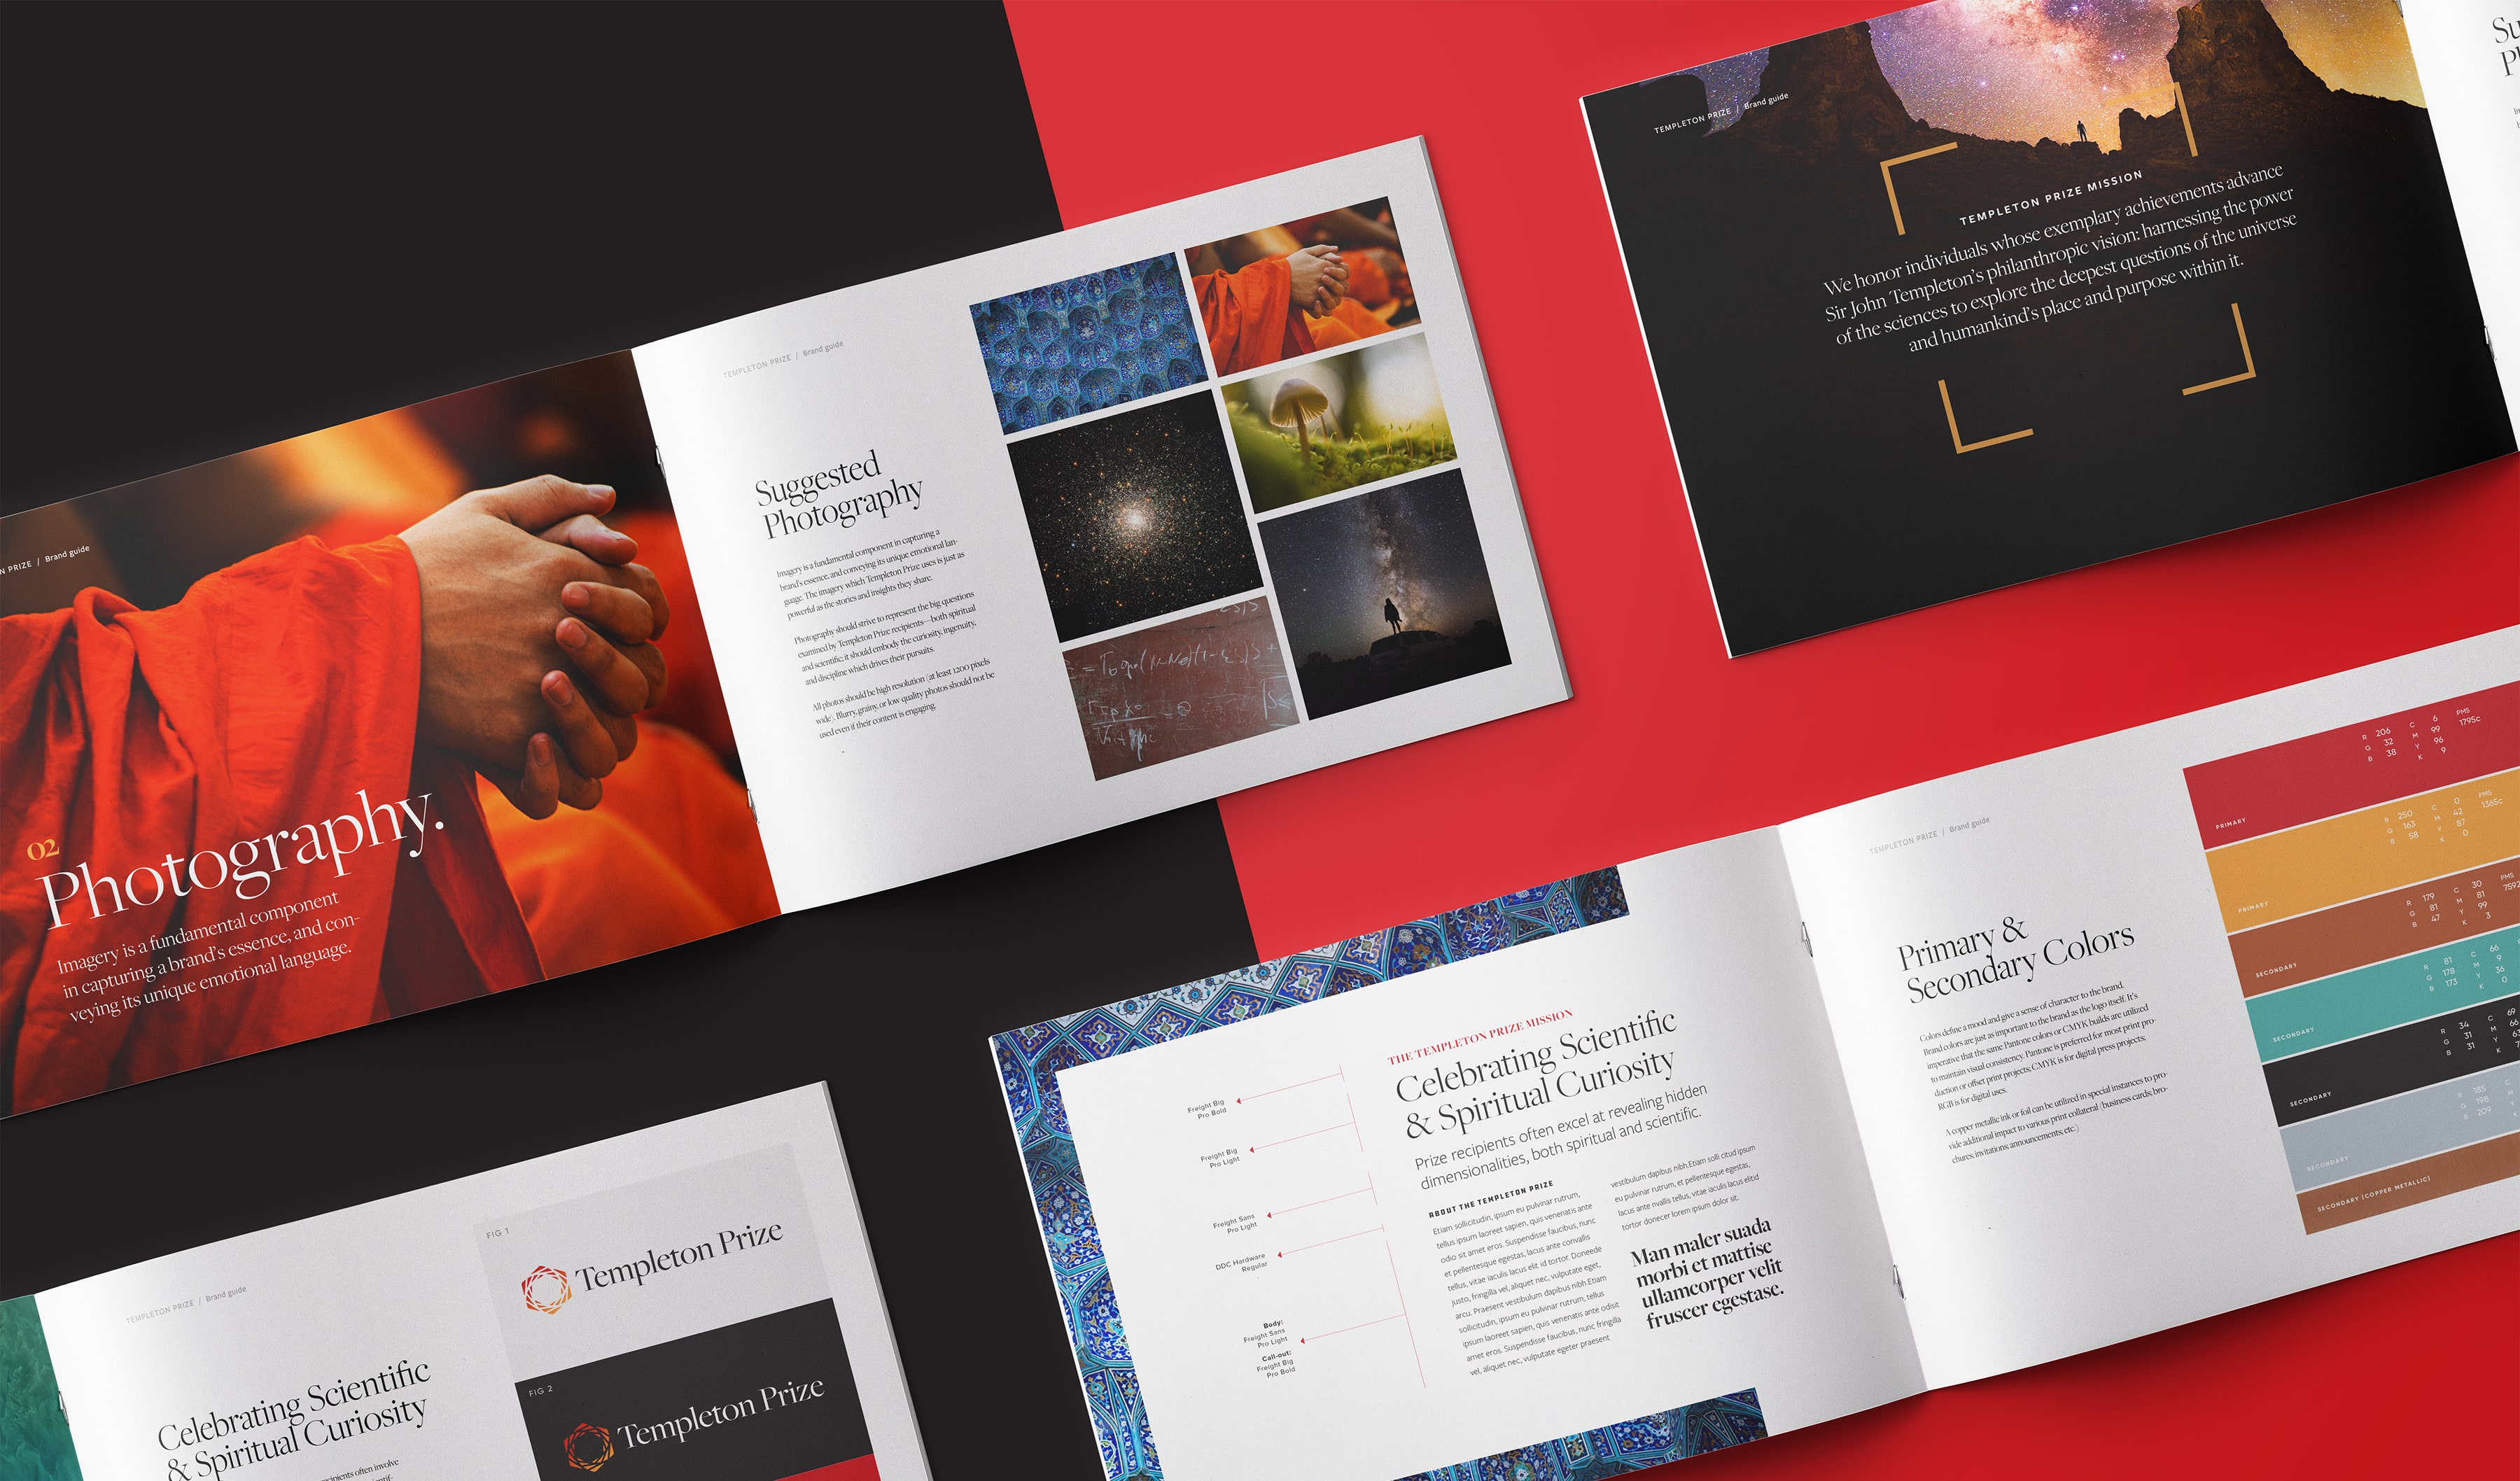 Brand style guide design for Templeton Prize, an award honoring progress in science and spirituality